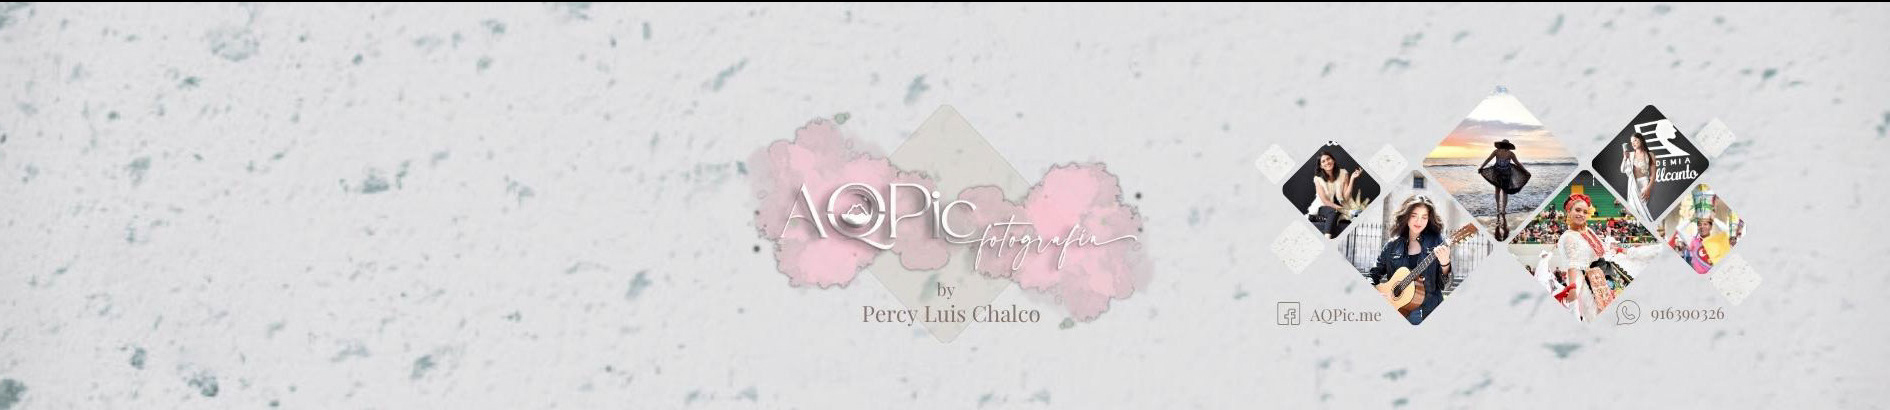 Percy Luis Chalco Paredess profilbanner